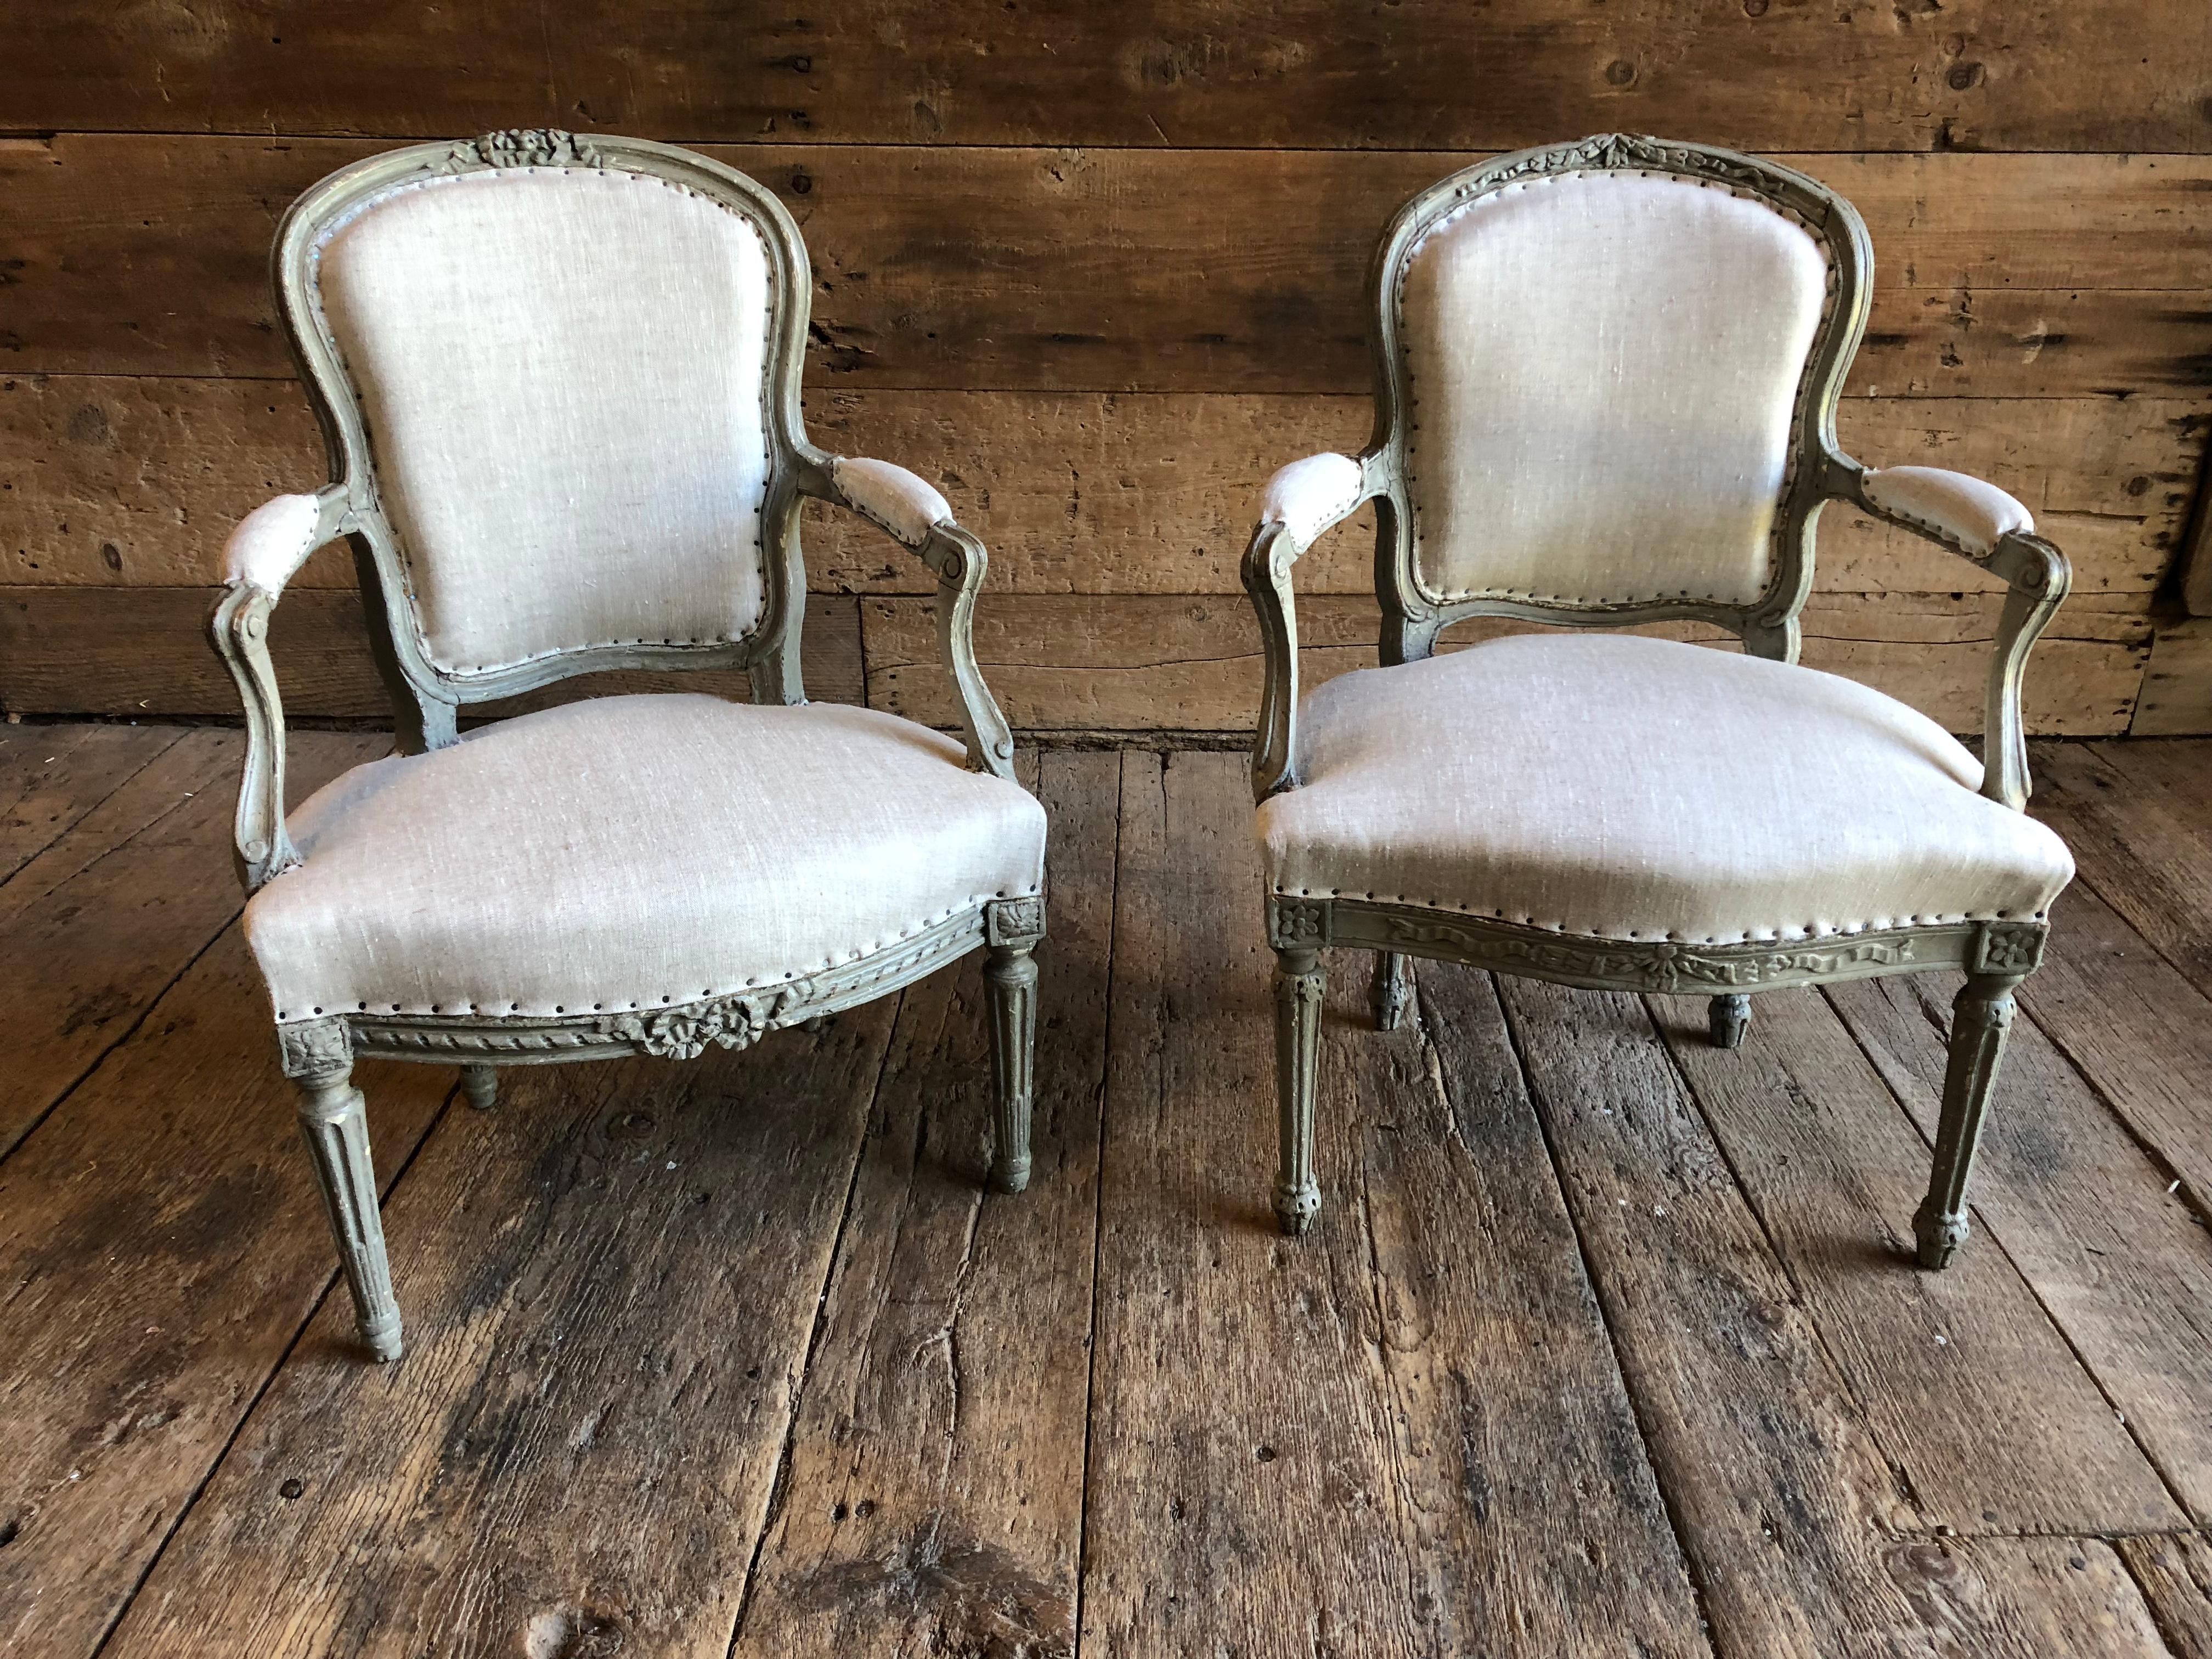 A matched companion pair of transitional Louis XVI period fauteuils in old grey painted finish, the arms showing elements of the early Louis XV period with subtle curves and scrolls, the back and seat rail with floral and ribbon carvings, both on